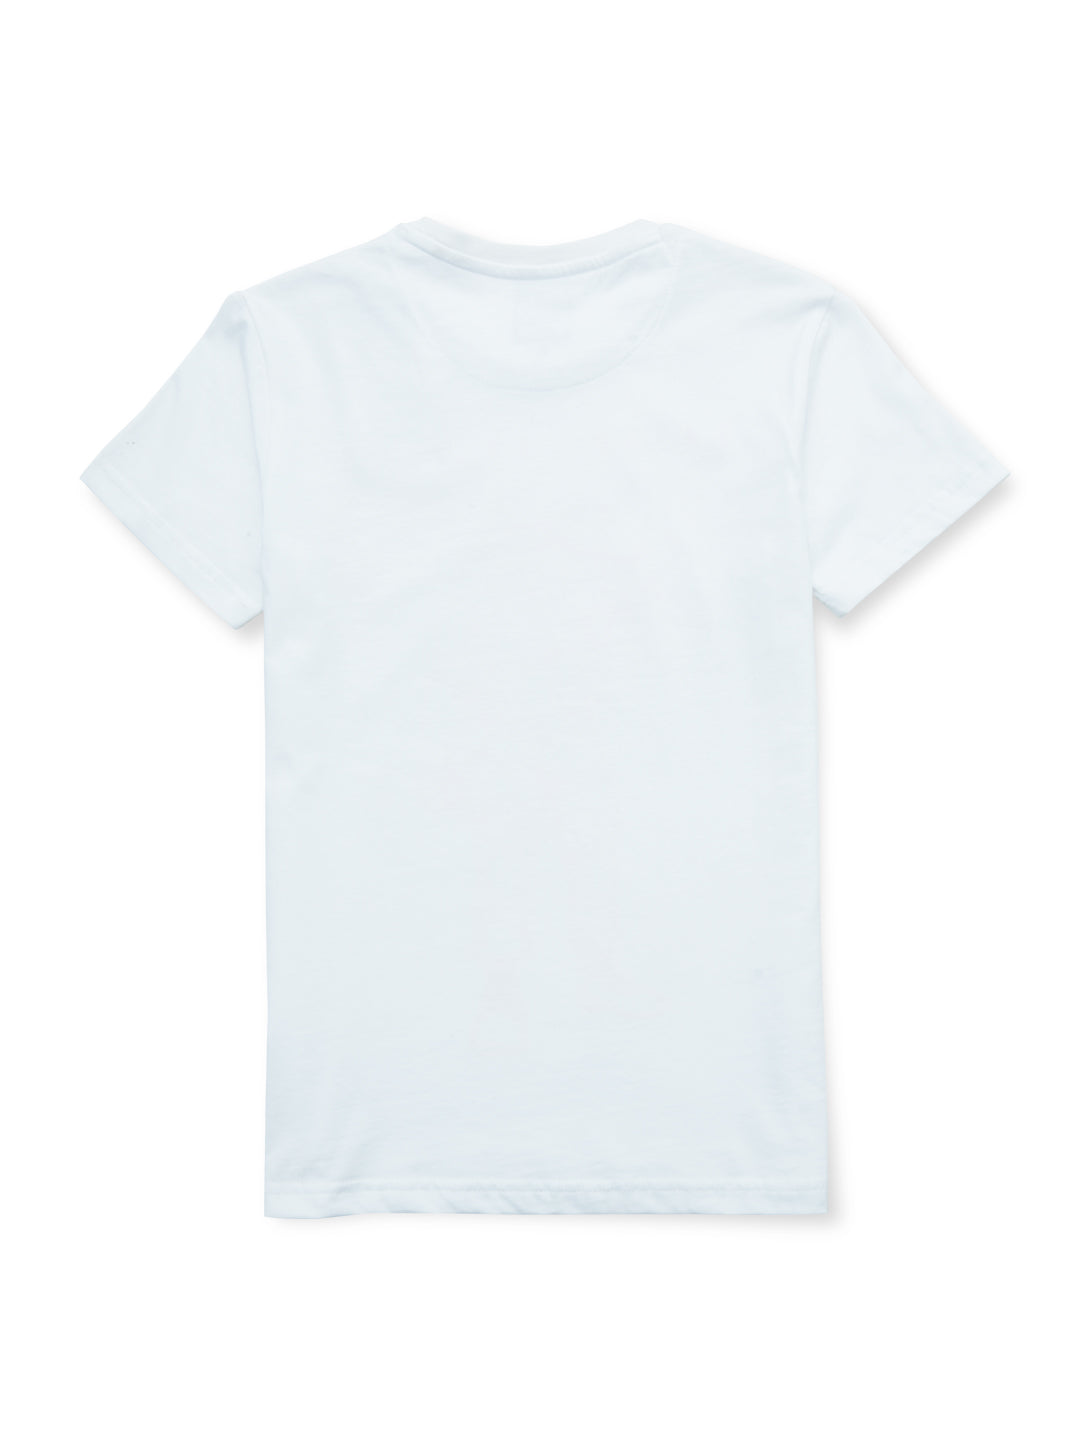 Boys white round neck knitted cotton printed t-shirt